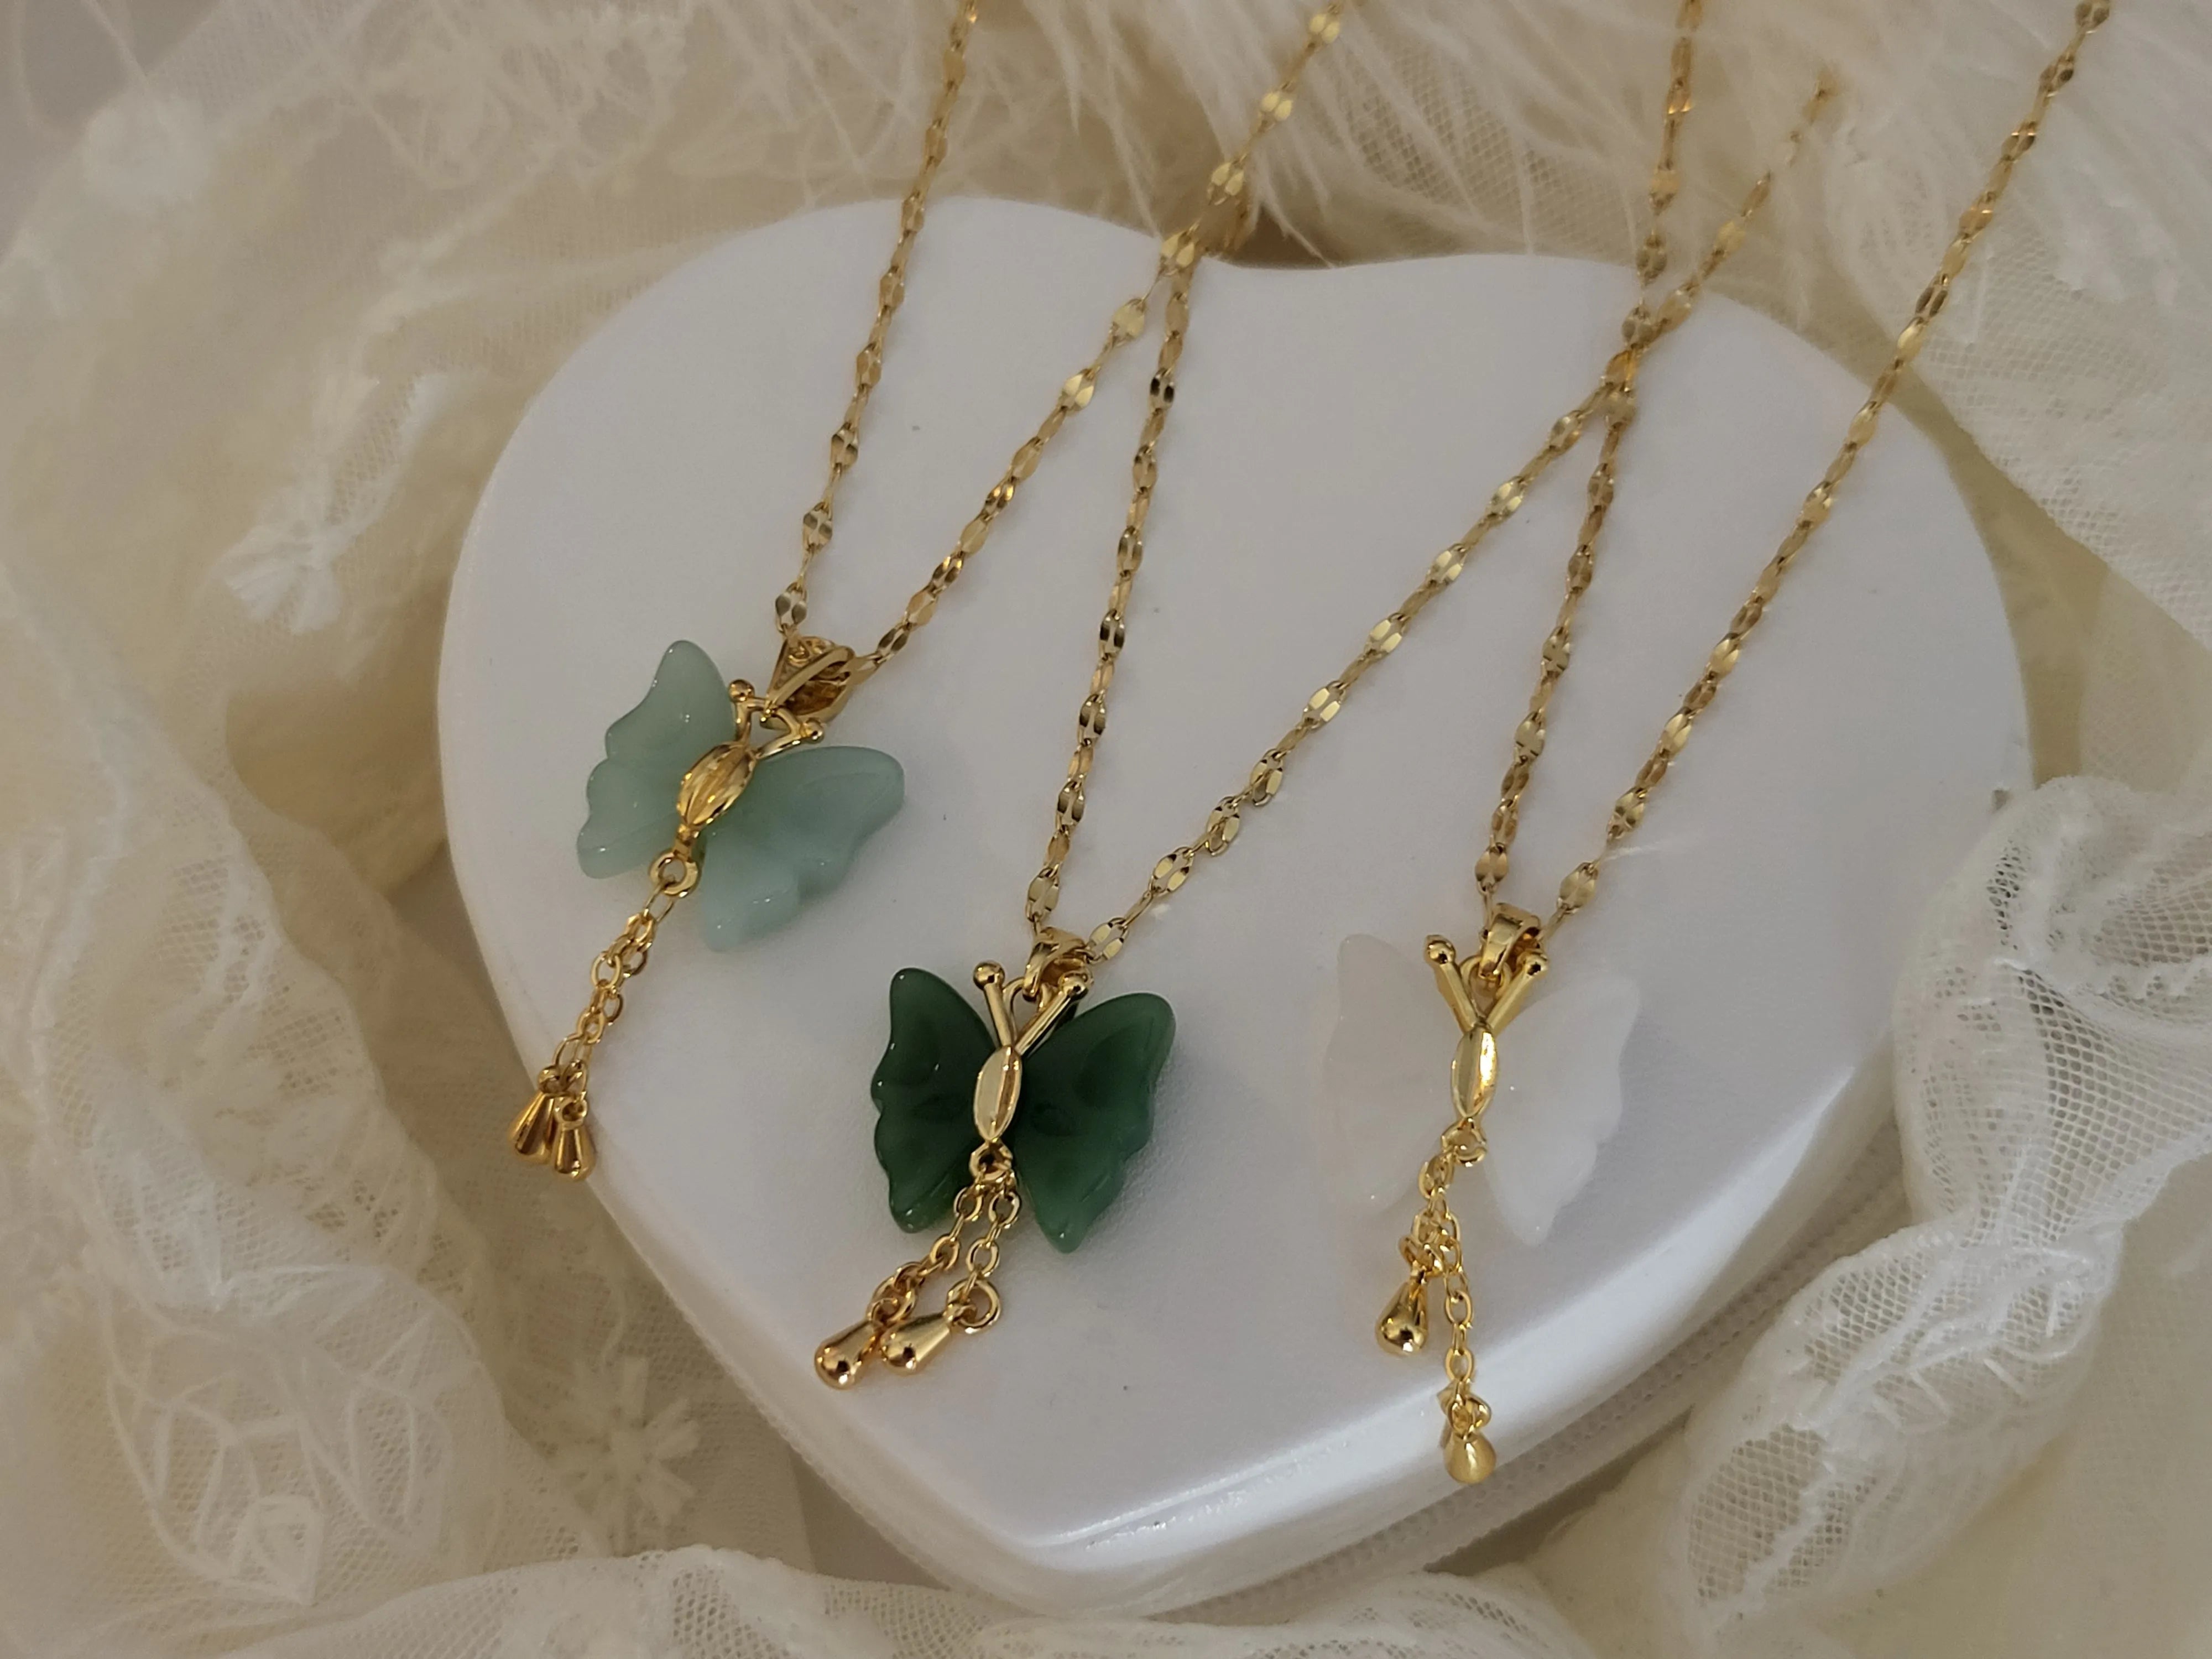 Butterfly Jade Necklace product images.